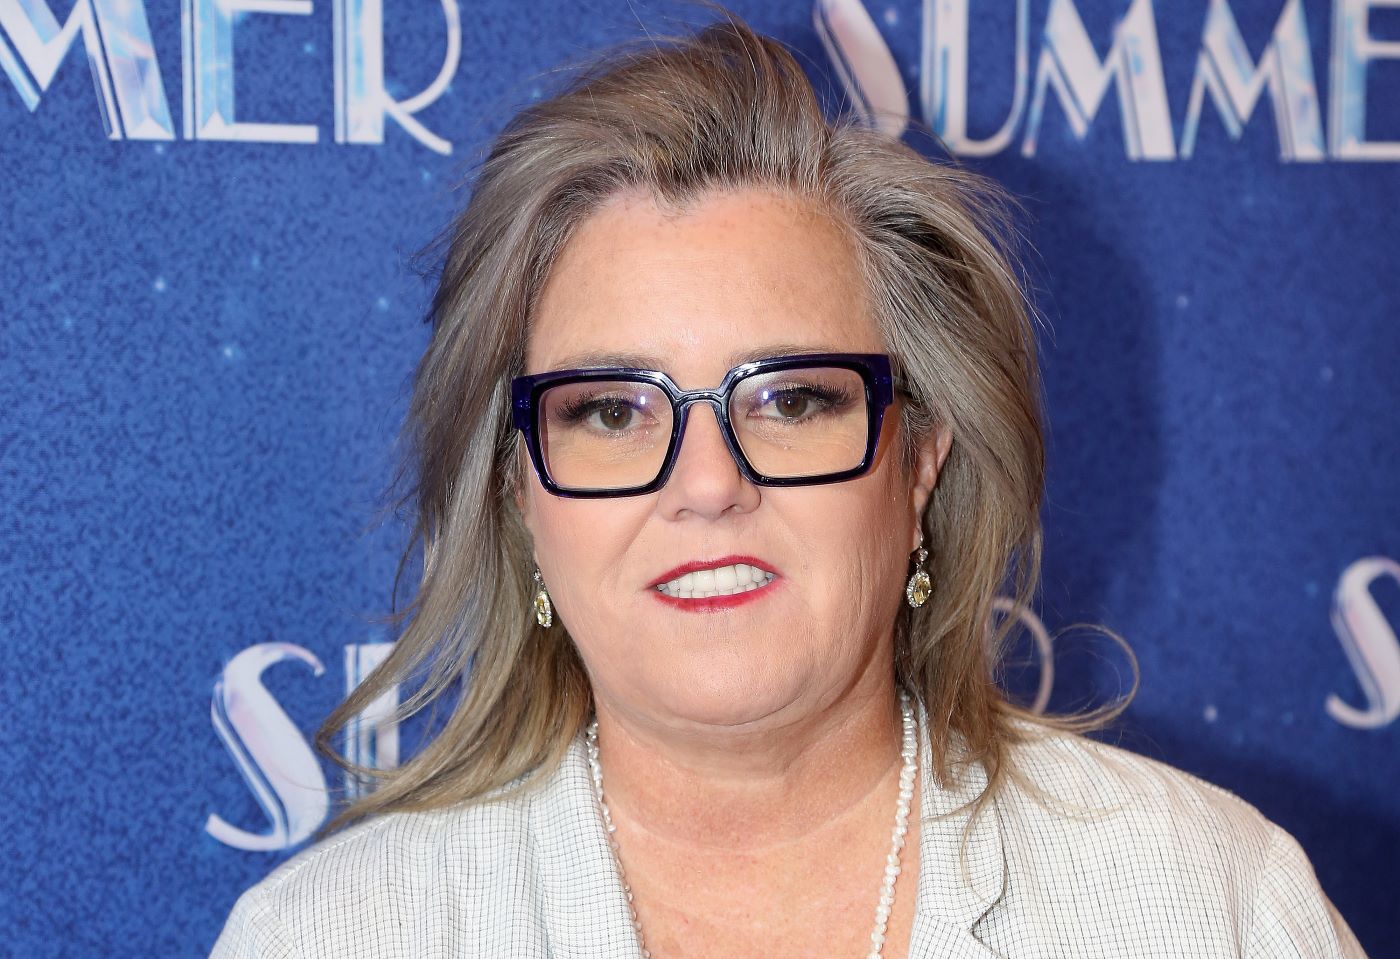 Rosie O'Donnell wearing a light beige colored jacket with a white undershirt against a blue and background with white writing on it.